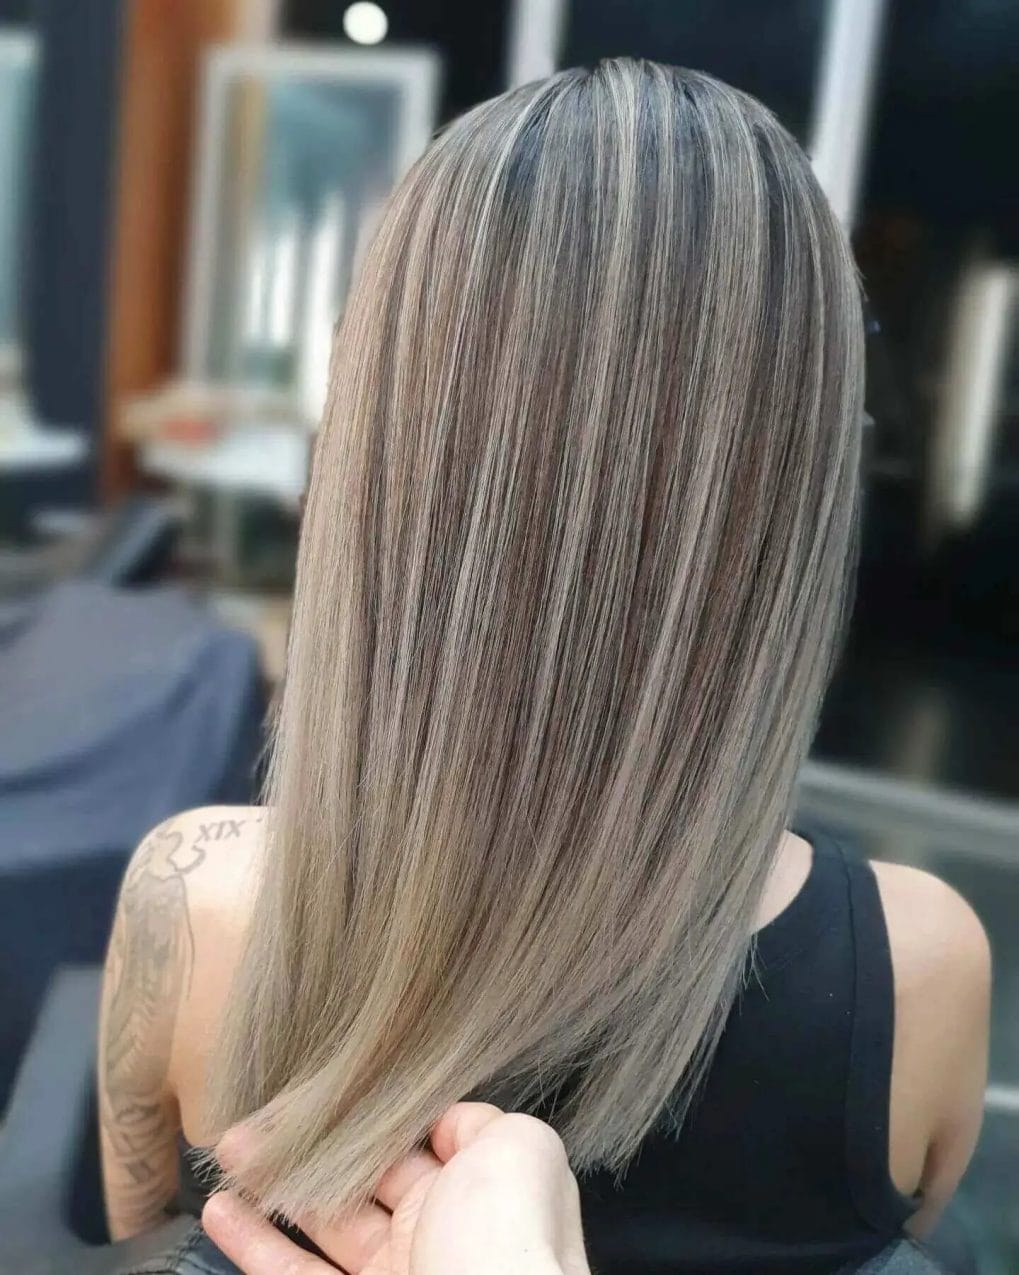 Shoulder-length straight hair featuring ash and platinum blonde highlights on darker base.